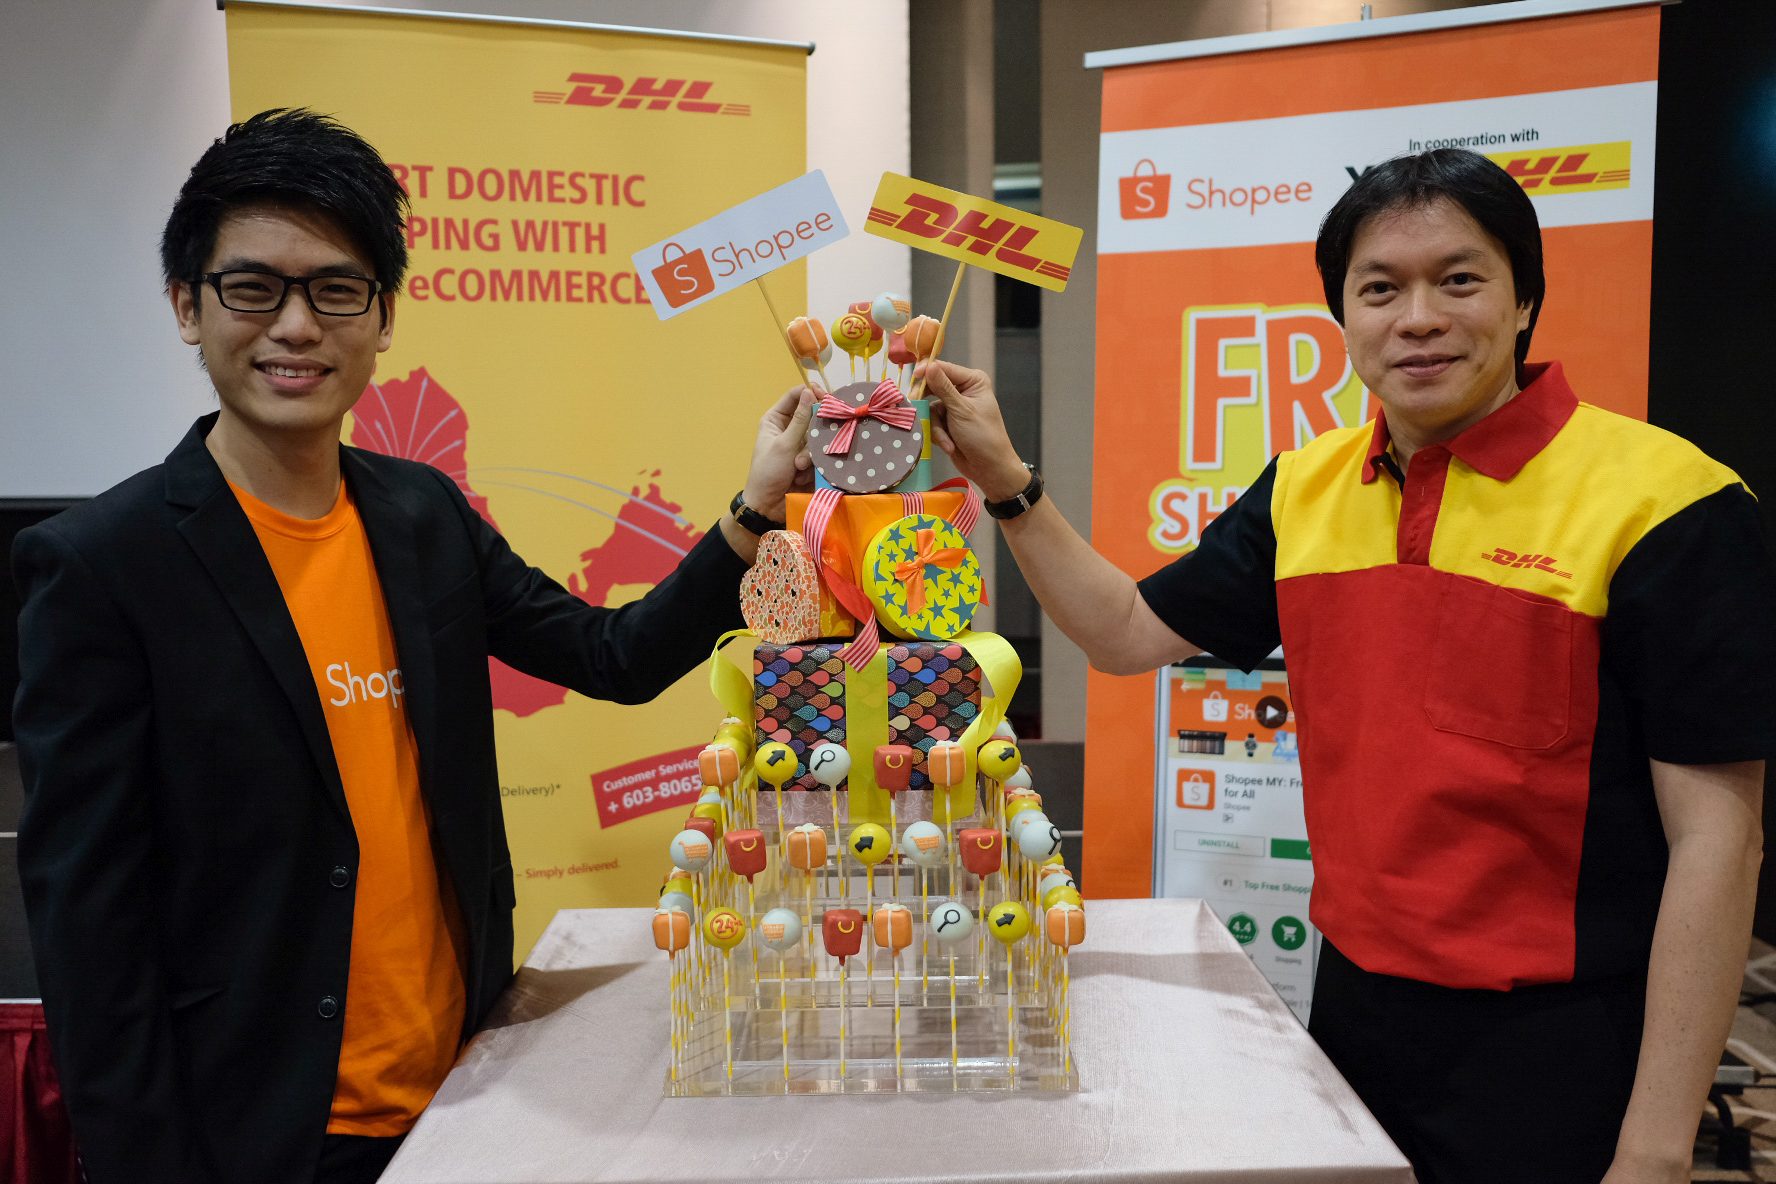 DHL eCommerce bets on next-day delivery service, ties up with Shopee Malaysia